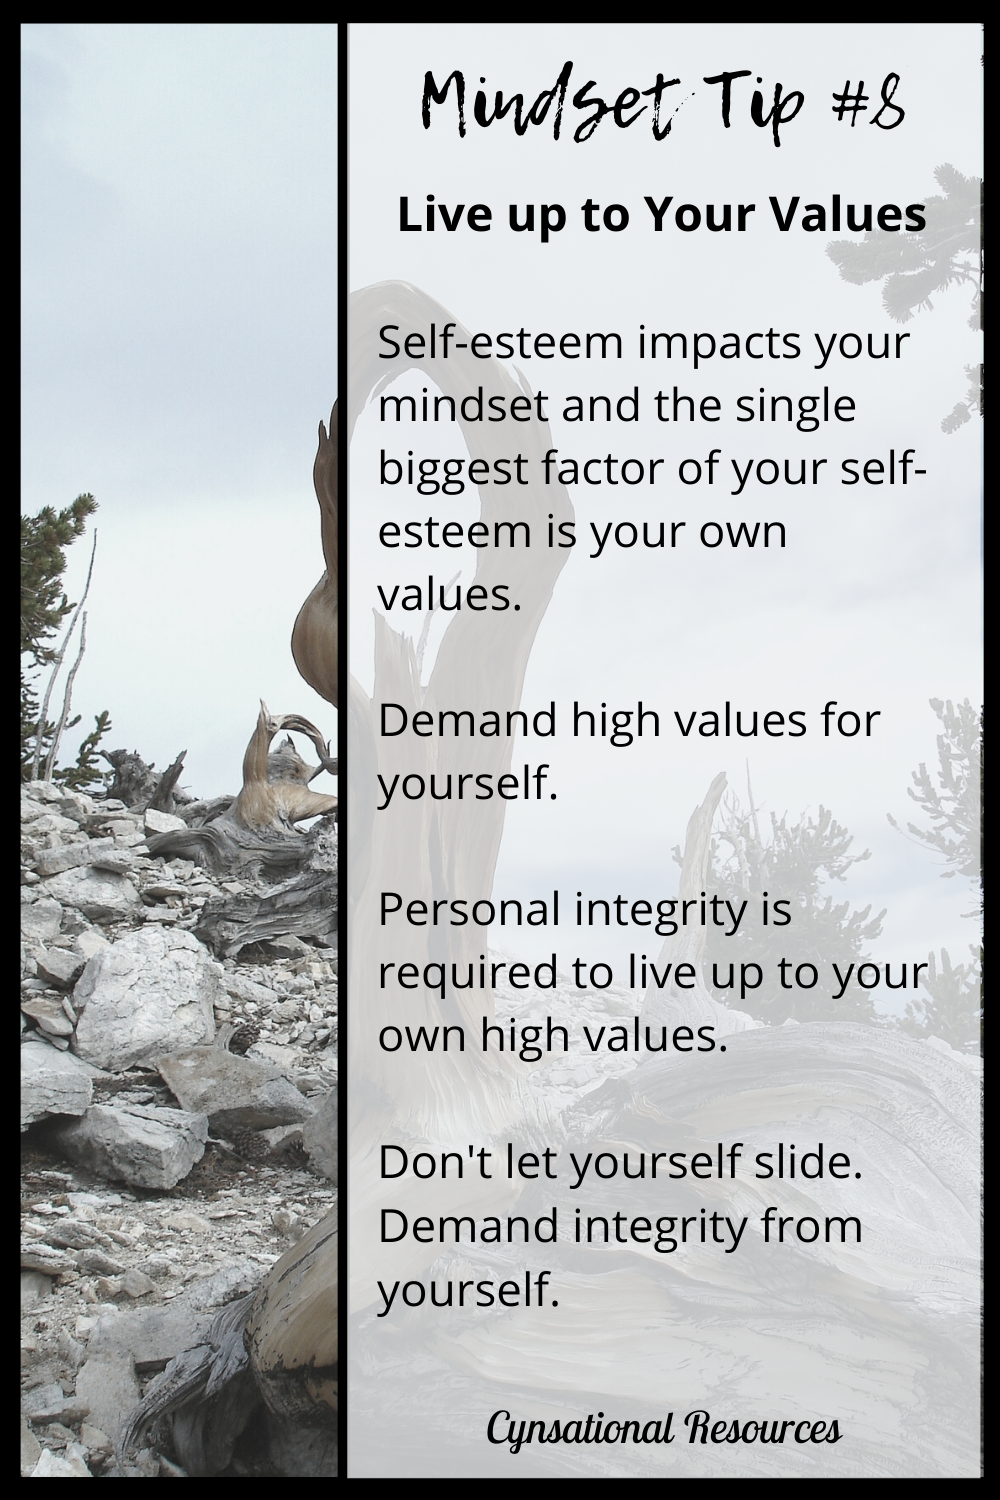 Live up to your values. Keep your integrity. 